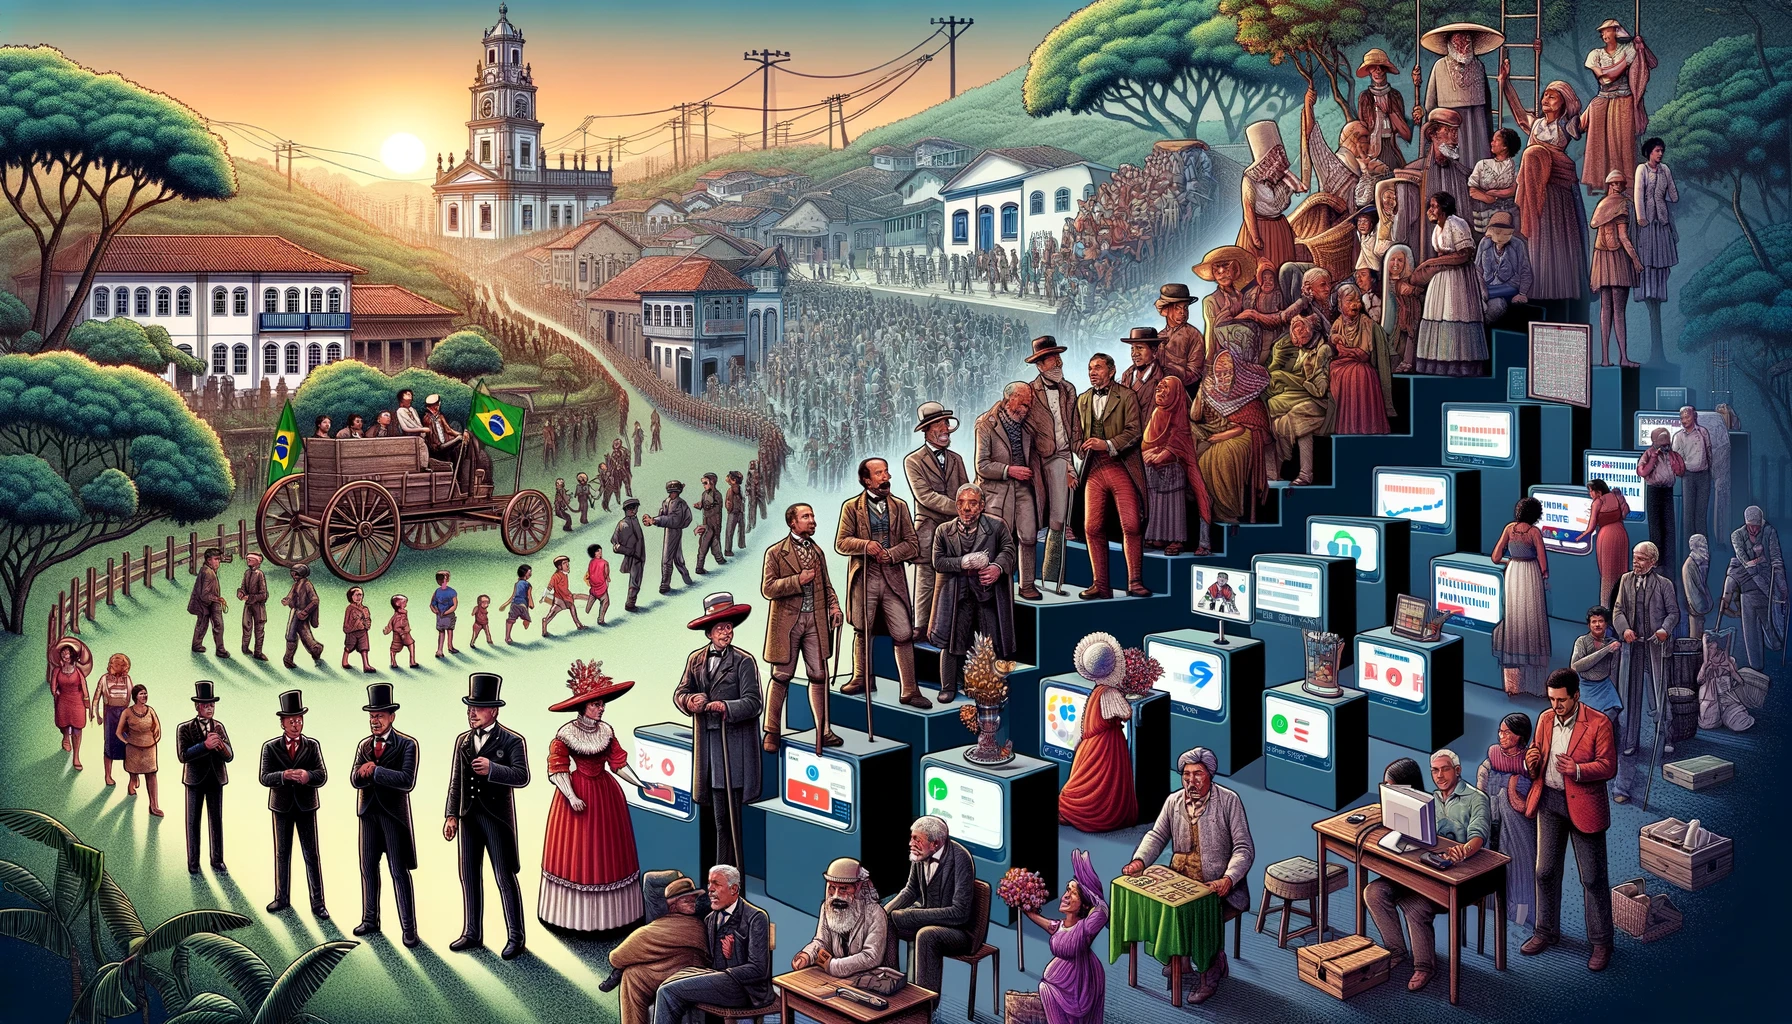 A timeline visual that represents the evolution of elections in Brazil from the colonial era to modern democracy. The image starts on the left with a depiction of the colonial period, showing a small group of elite landowners and merchants discussing politics in a colonial Brazilian setting. The timeline then progresses through different eras: the Proclamation of the Republic in 1889 with citizens voting in a more organized setting, the women's suffrage movement in the 1930s, the military regime period with a depiction of restricted political activity and military figures, the transition to democracy in the 1980s with people celebrating the return of democratic elections, and finally the modern era with a diverse group of Brazilians using electronic voting machines and engaging in debates on social media platforms. The background should subtly change to reflect the changing times and technology, illustrating the journey from a centralized, oligarchic system to a vibrant, inclusive democracy.